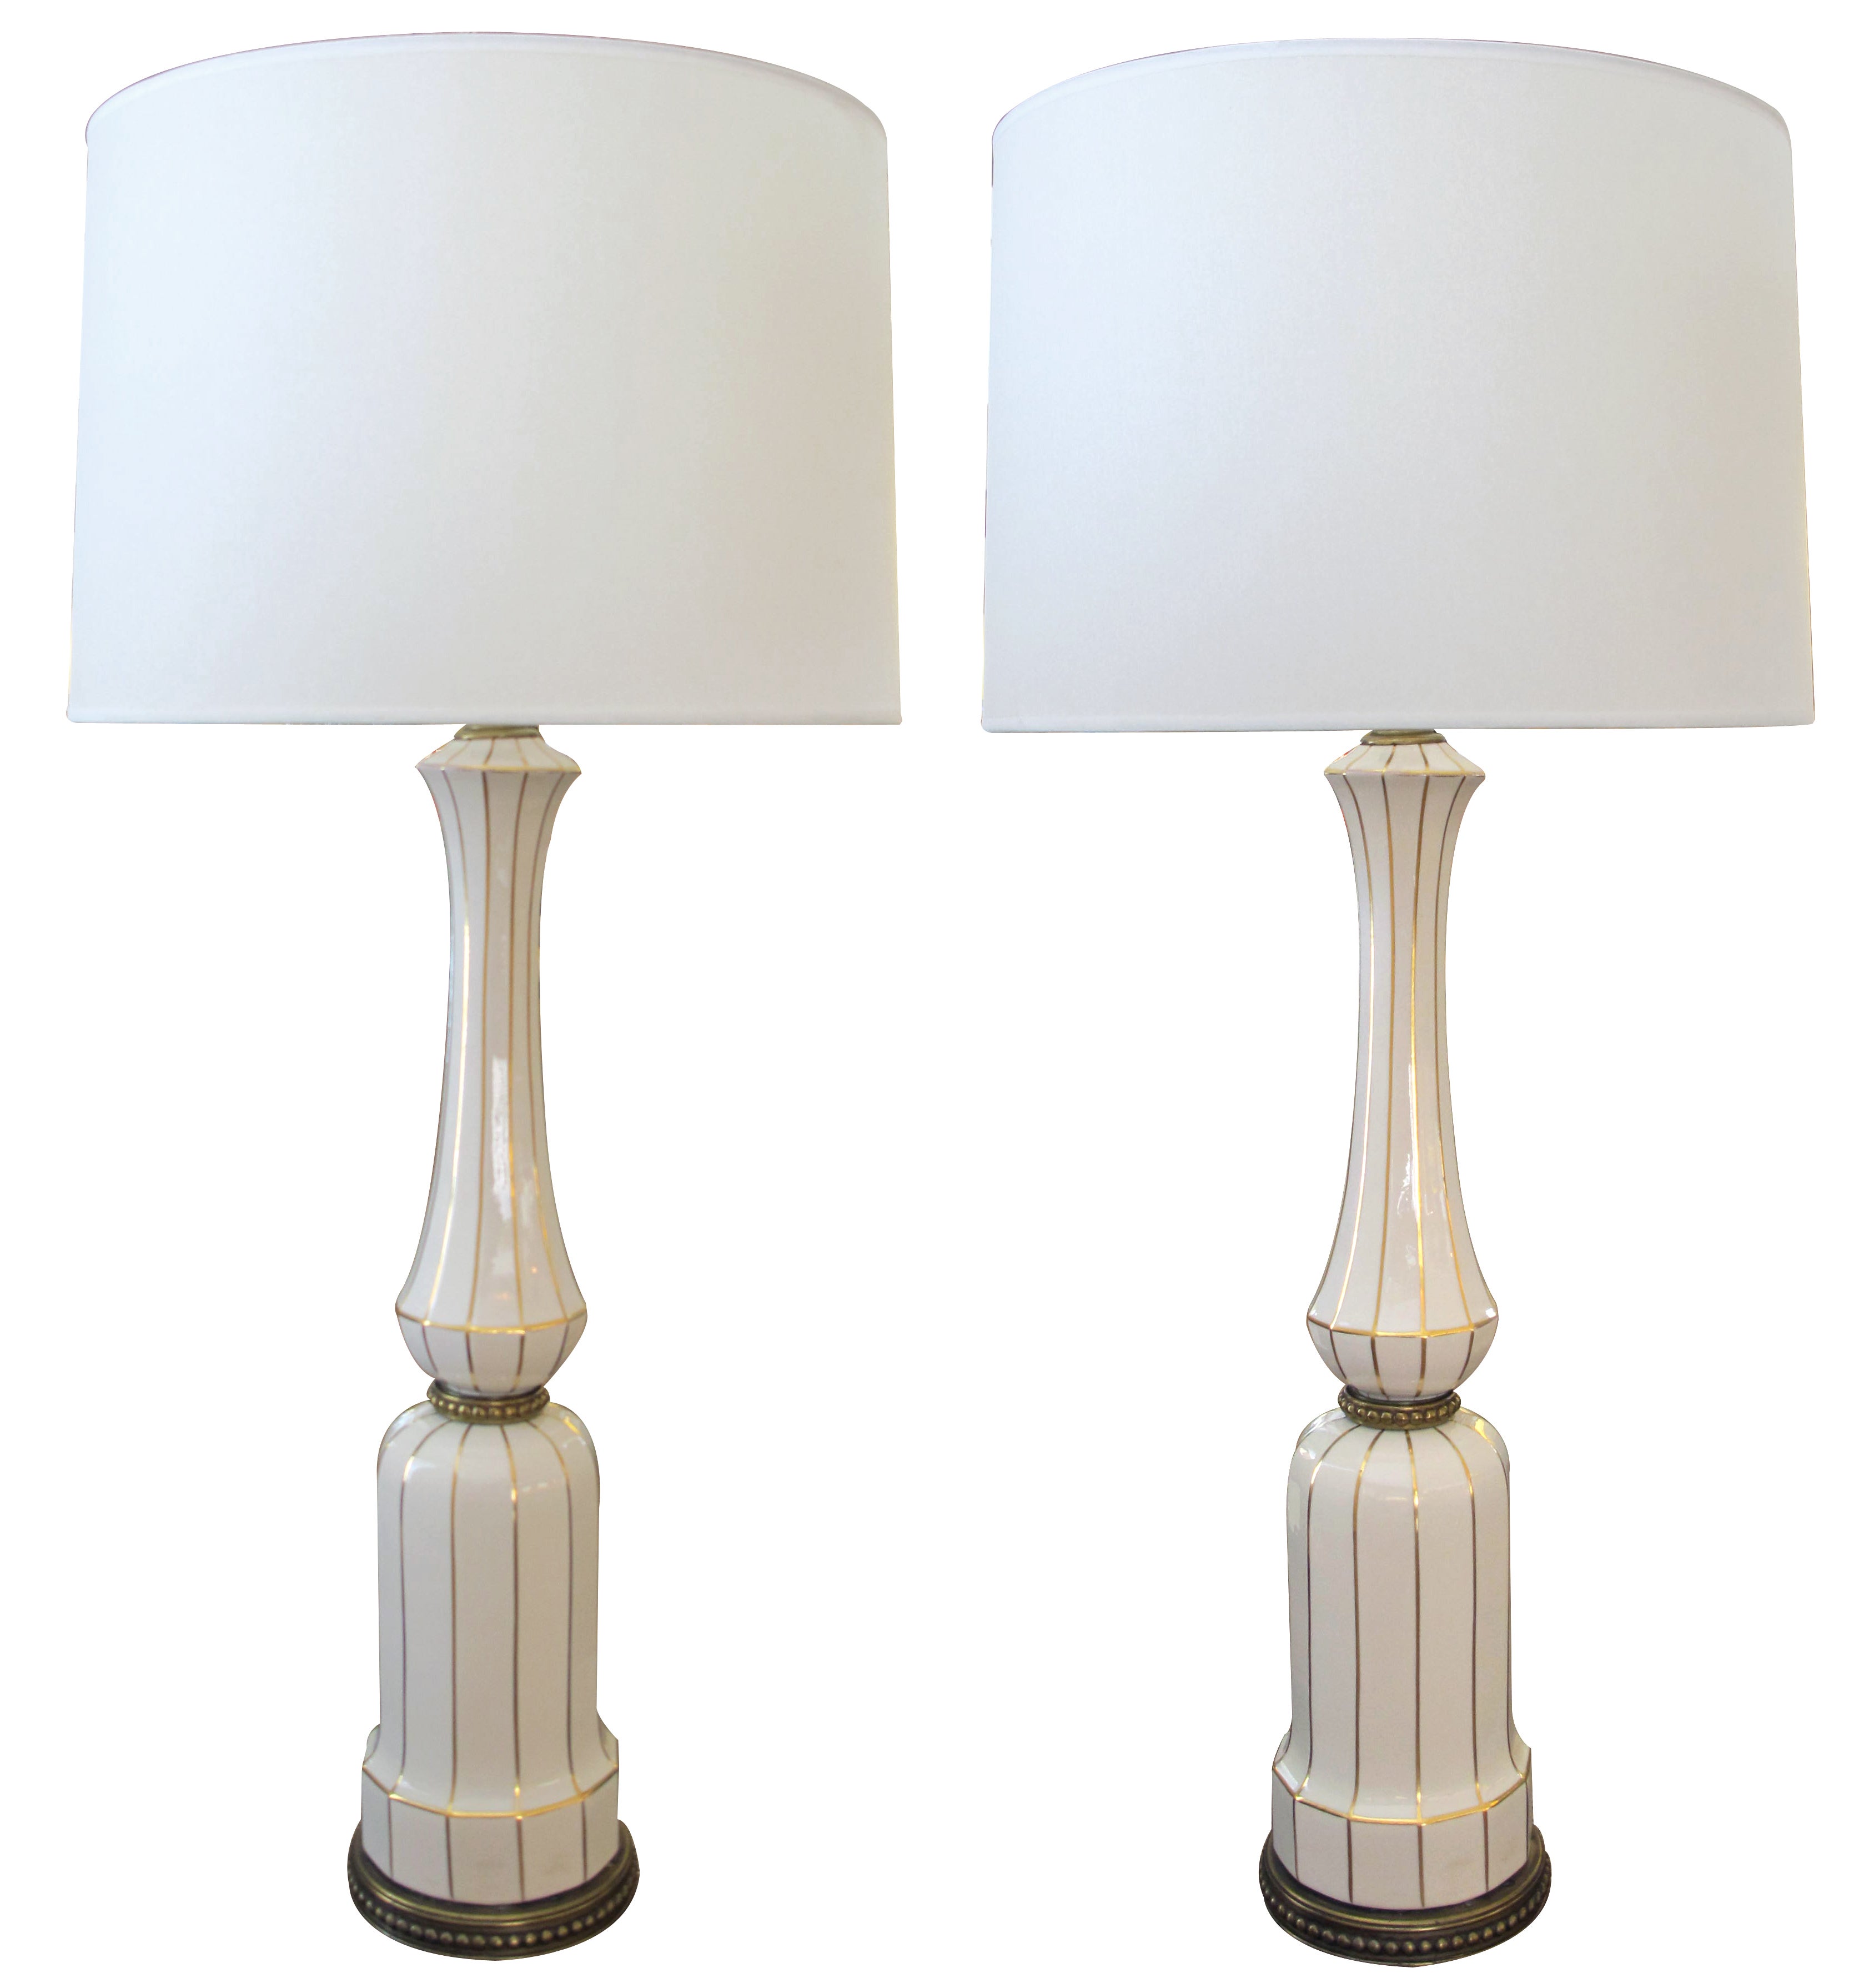 A Tall Pair of American 1960's Ivory Porcelain Baluster-Form Lamps; by Lenox